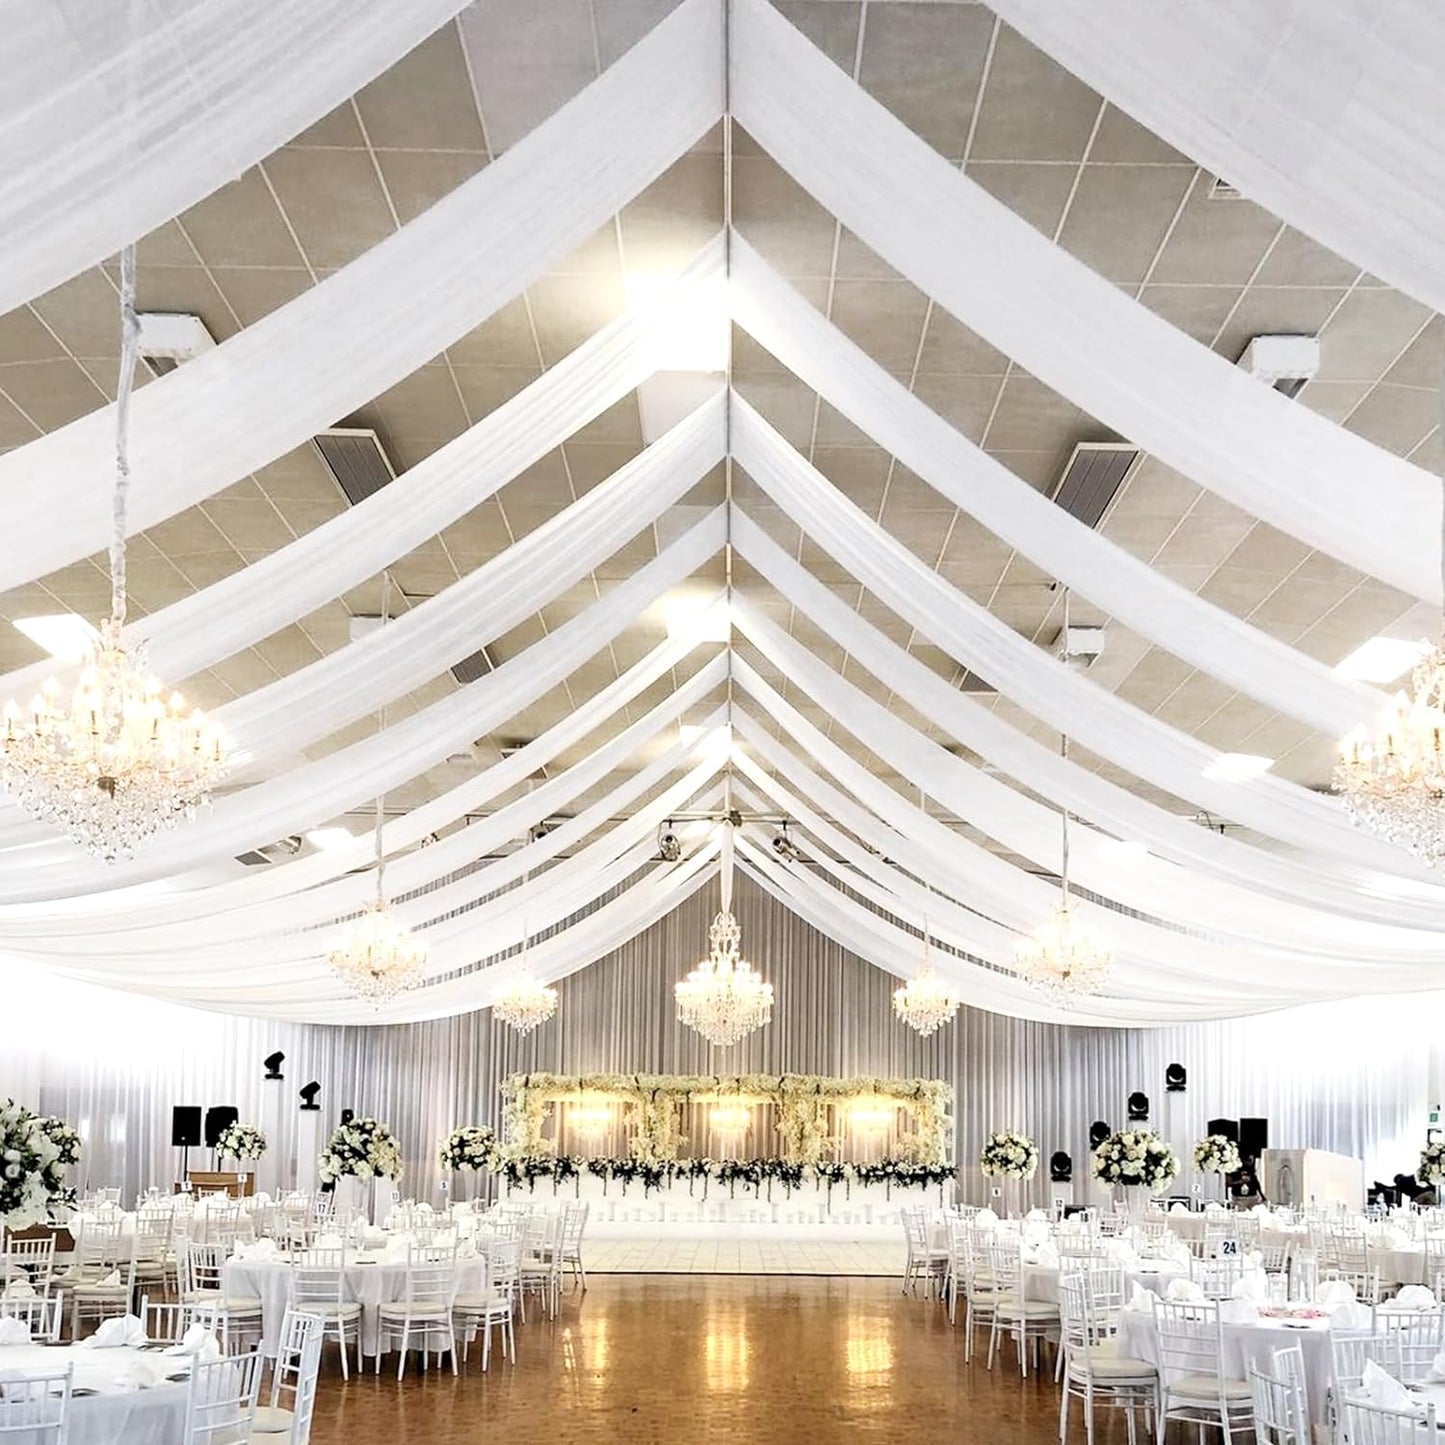 6 Panels White Ceiling Drapes for Wedding Ceiling Drapes 5Ftx20Ft Wedding Arch Draping Fabric Sheer Curtains Voile Chiffon Drapery Draping Wedding Ceiling Decorations for Party Ceremony Stage Swag  Showgeous White 4 Panel-5Ftx40Ft(60"Wx480"L) 